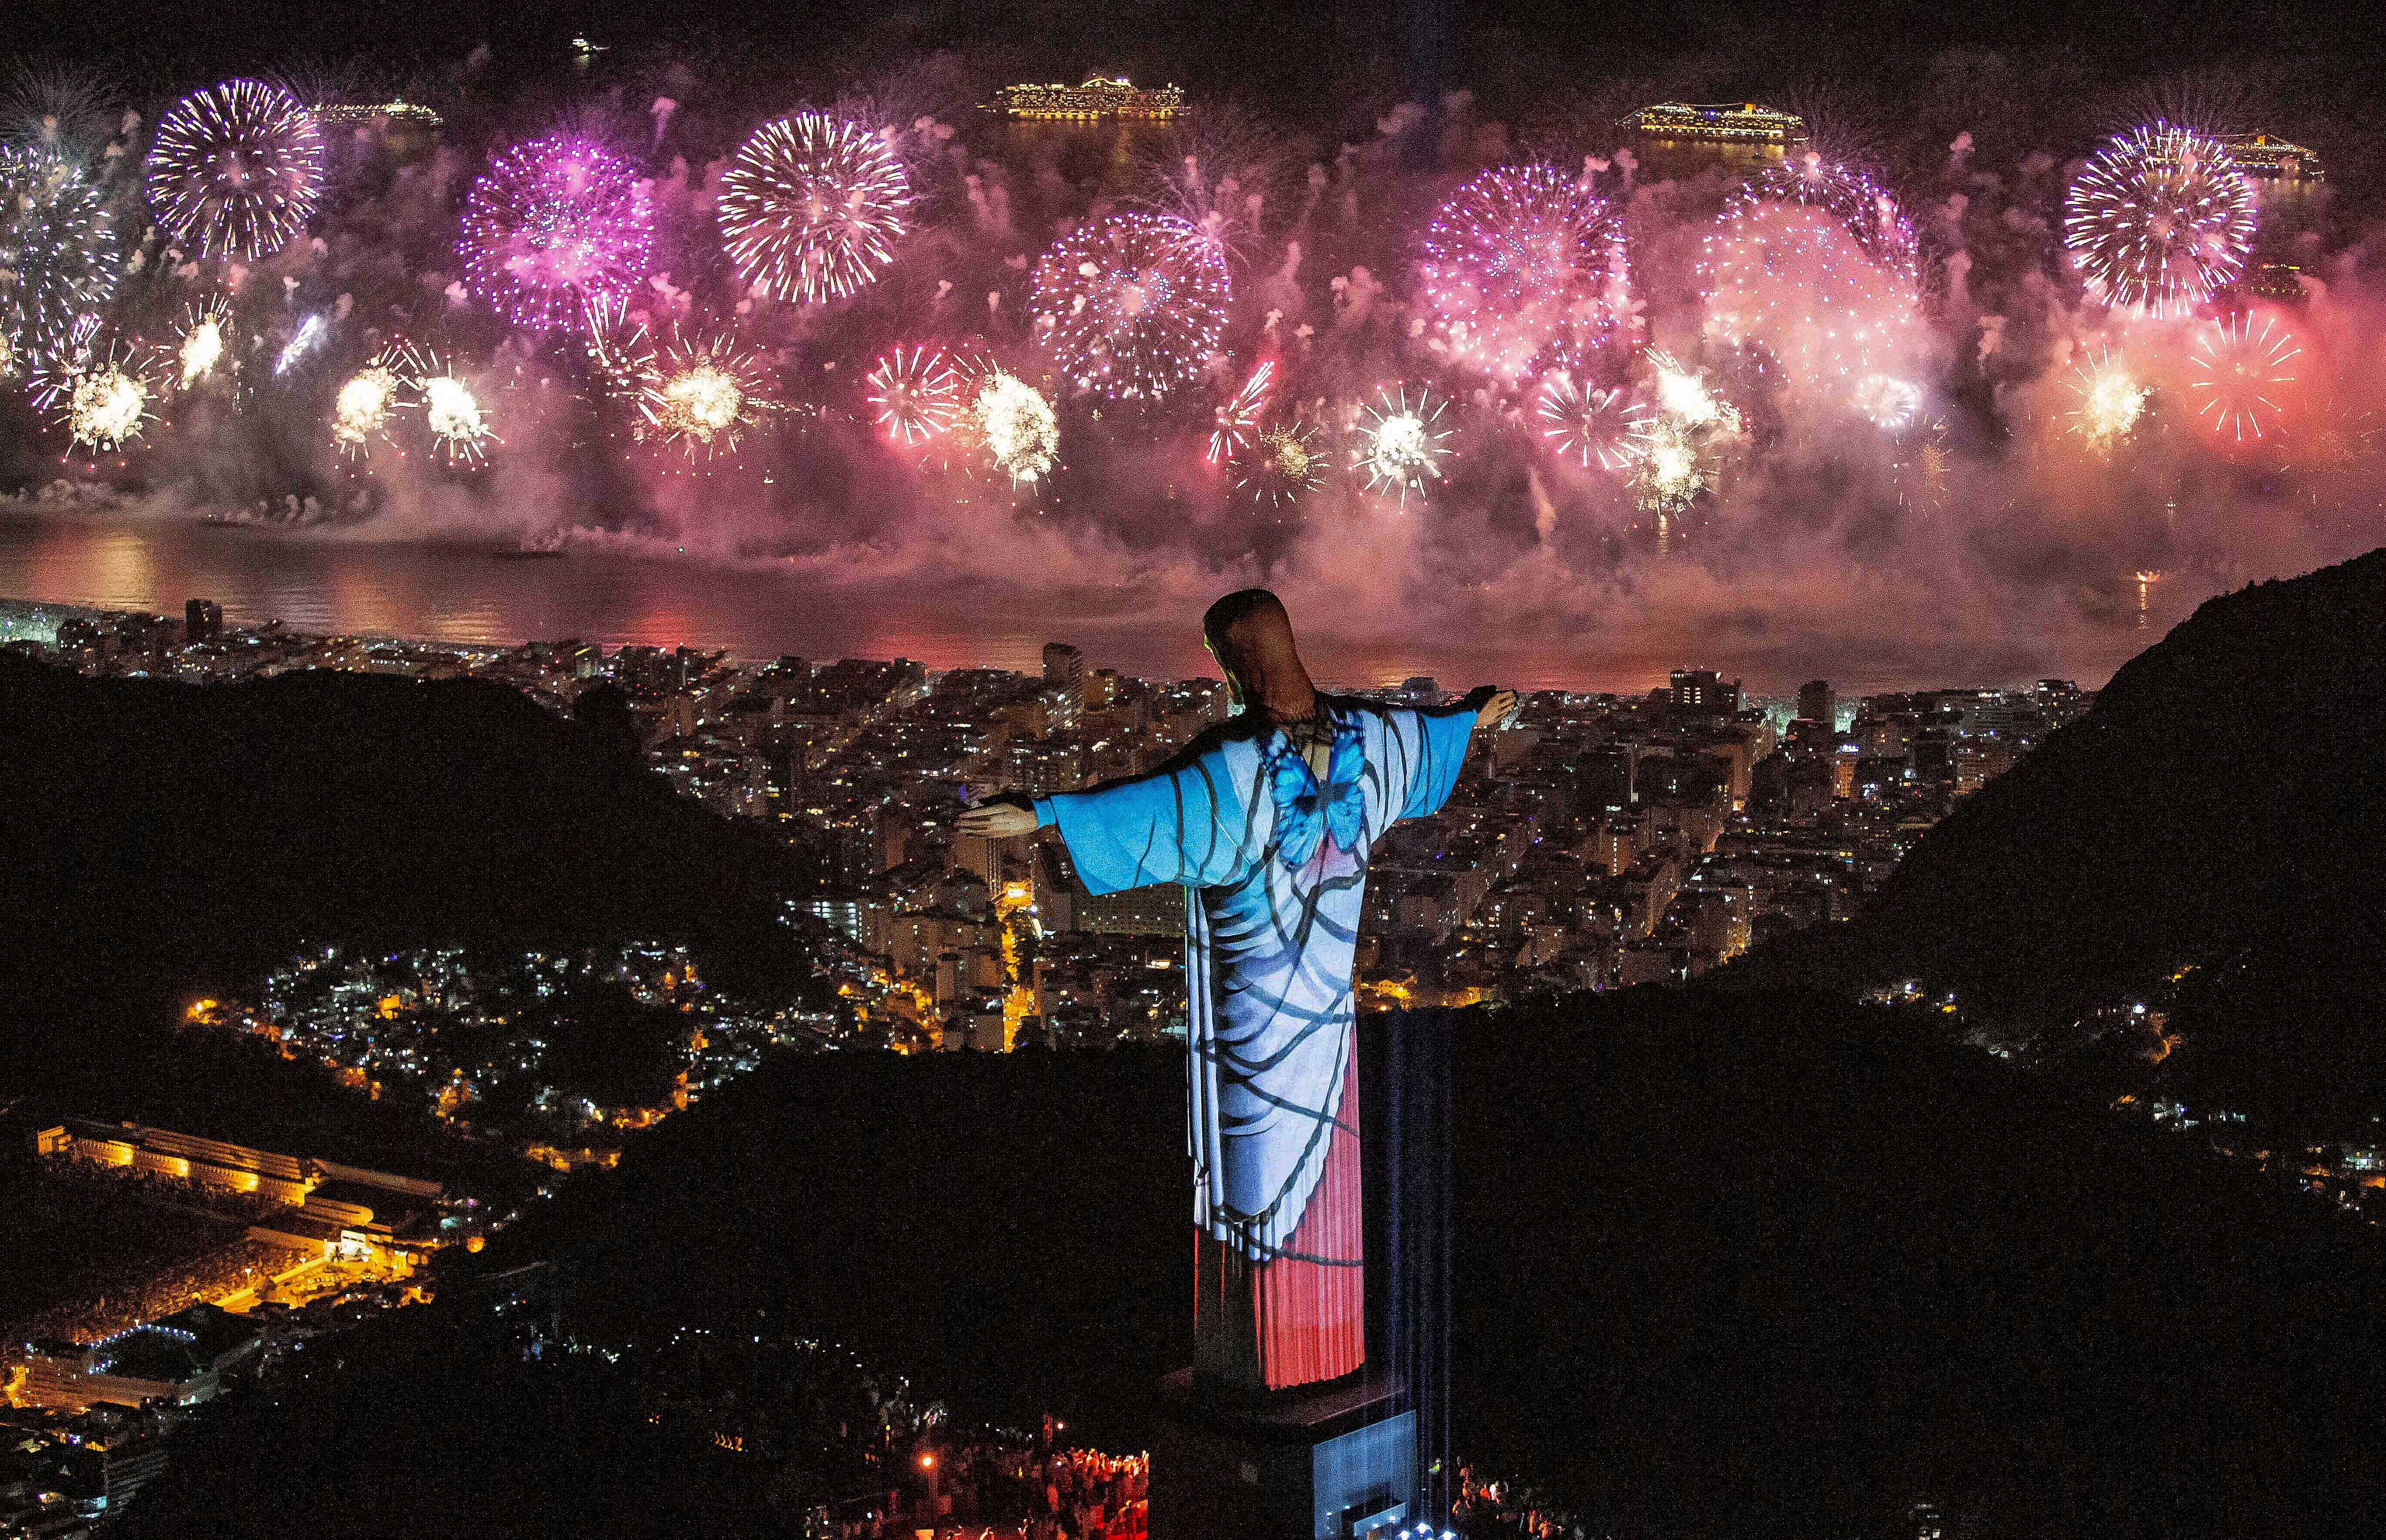 A fireworks display behind Christ the Redeemer during New Year’s Eve celebrations in Rio de Janeiro, Brazil, on 1 January 2020